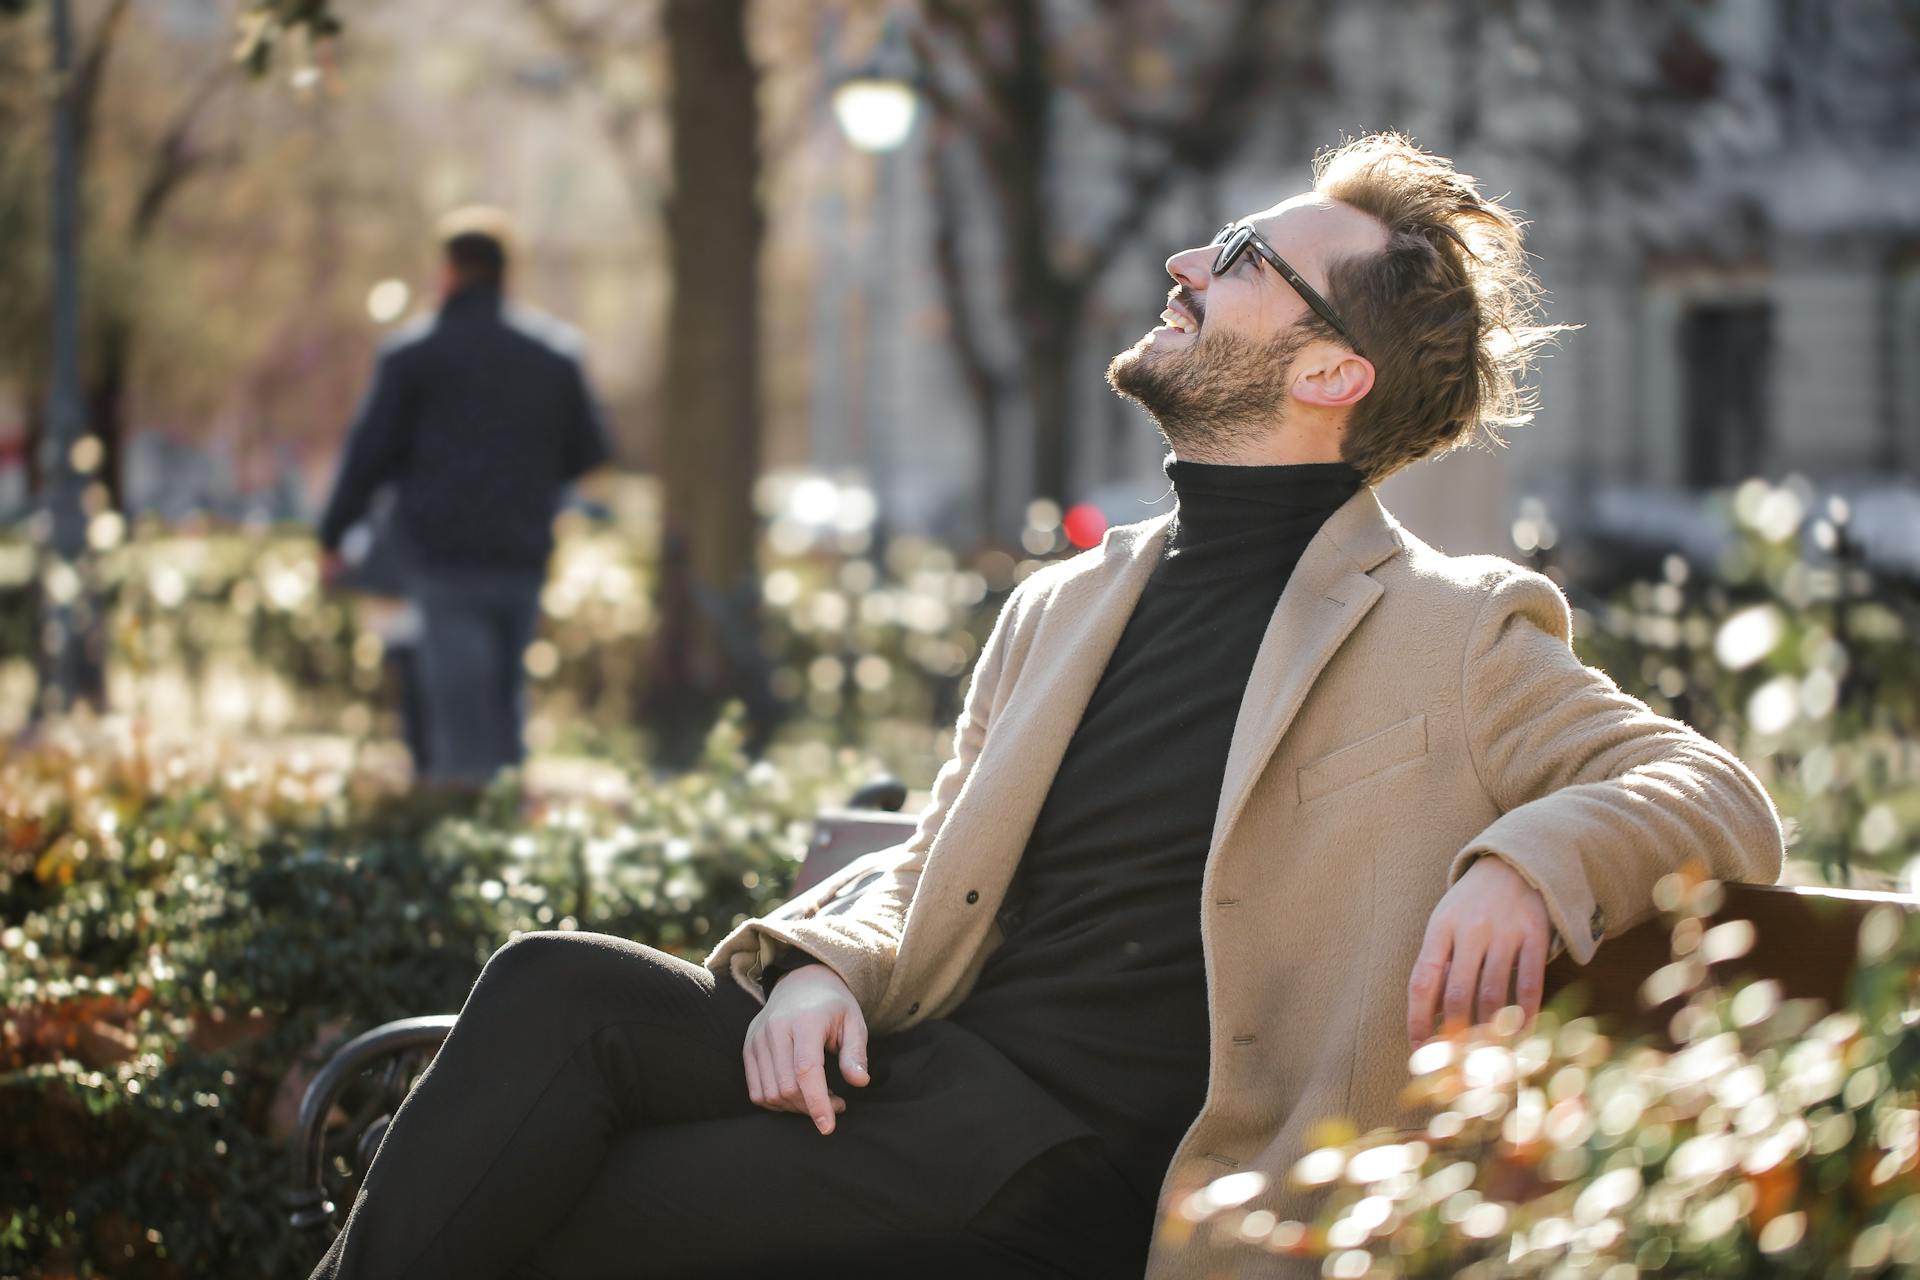 A man sitting on a bench | Source: Pexels